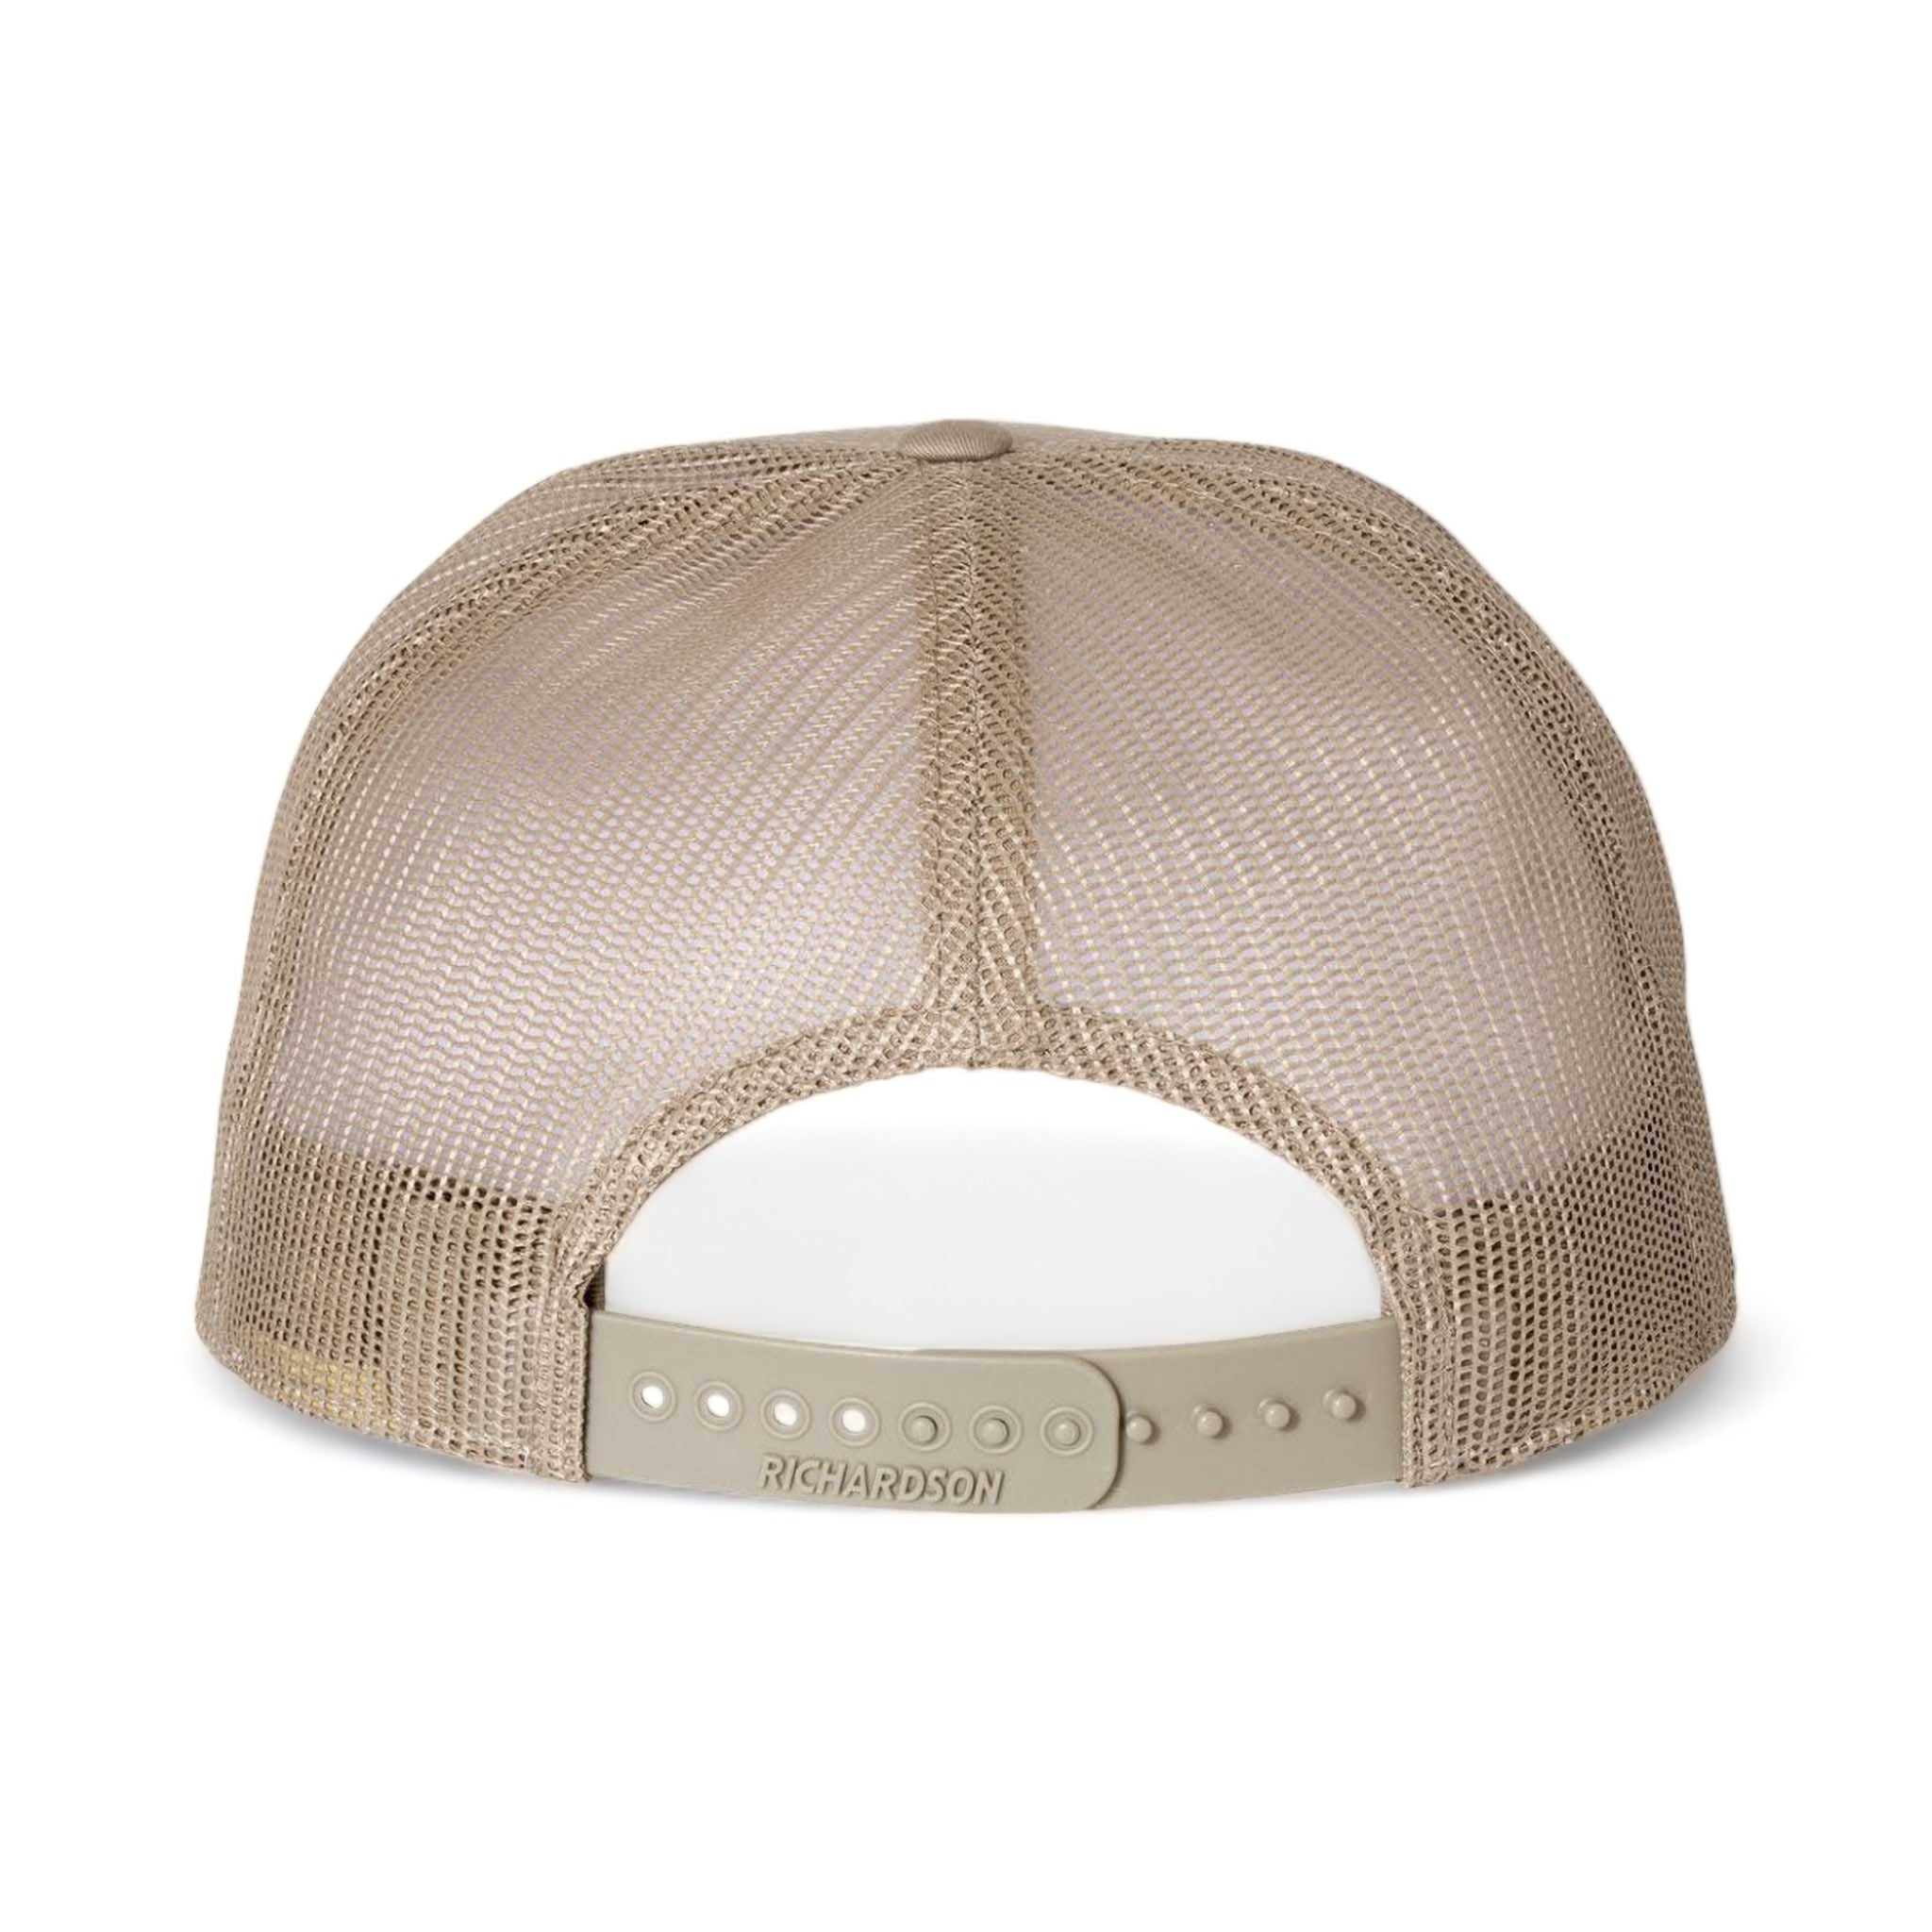 Back view of Richardson 168 custom hat in brown and khaki